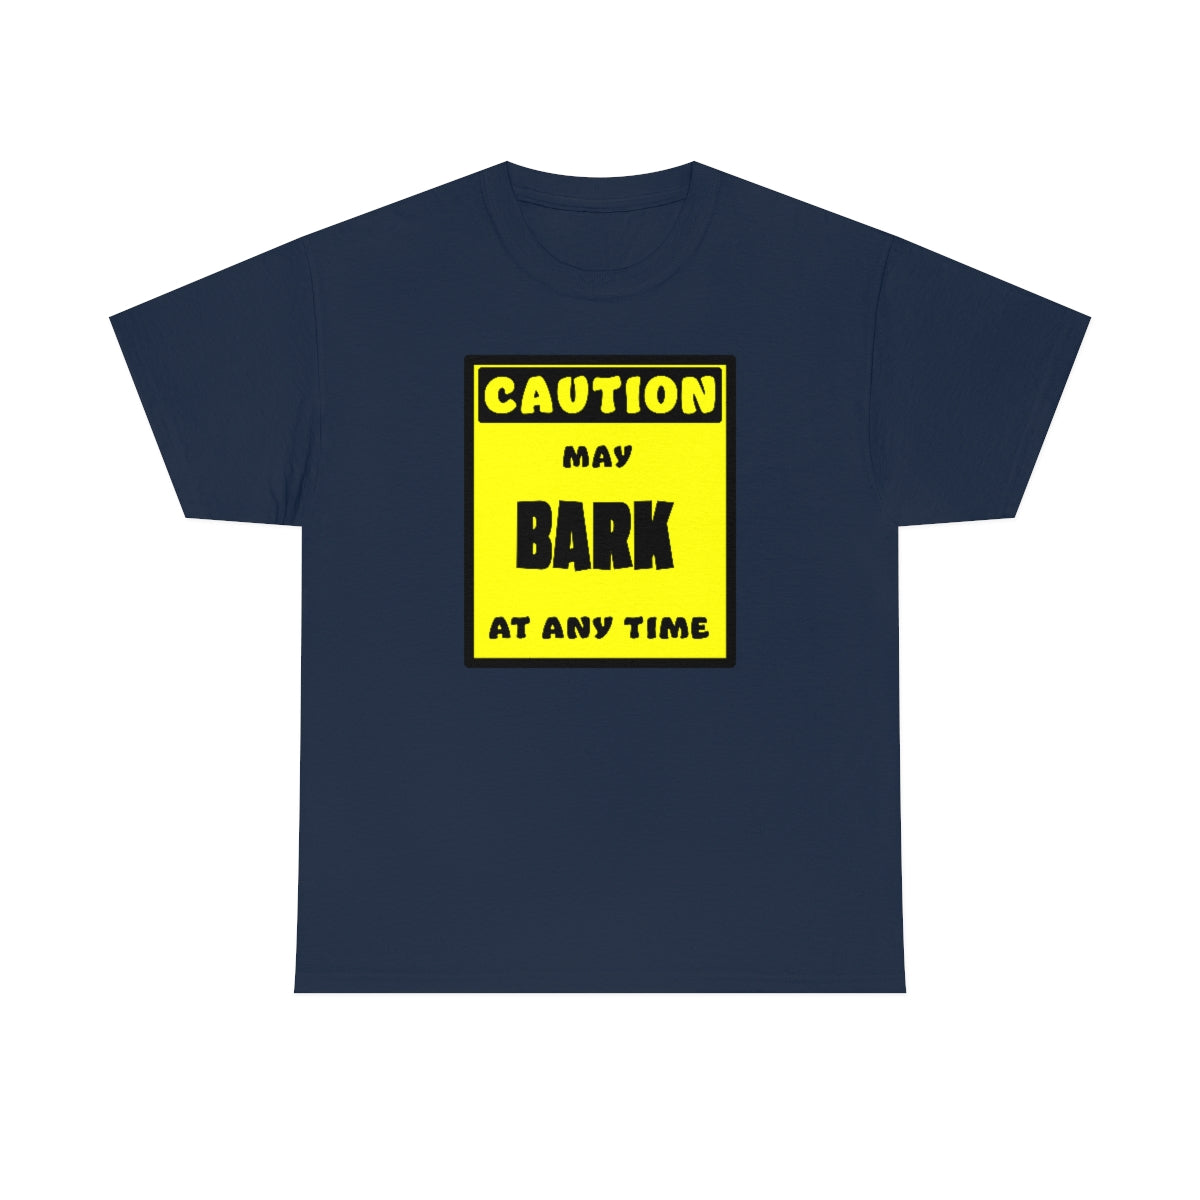 CAUTION! May BARK at any time! - T-Shirt T-Shirt AFLT-Whootorca Navy Blue S 